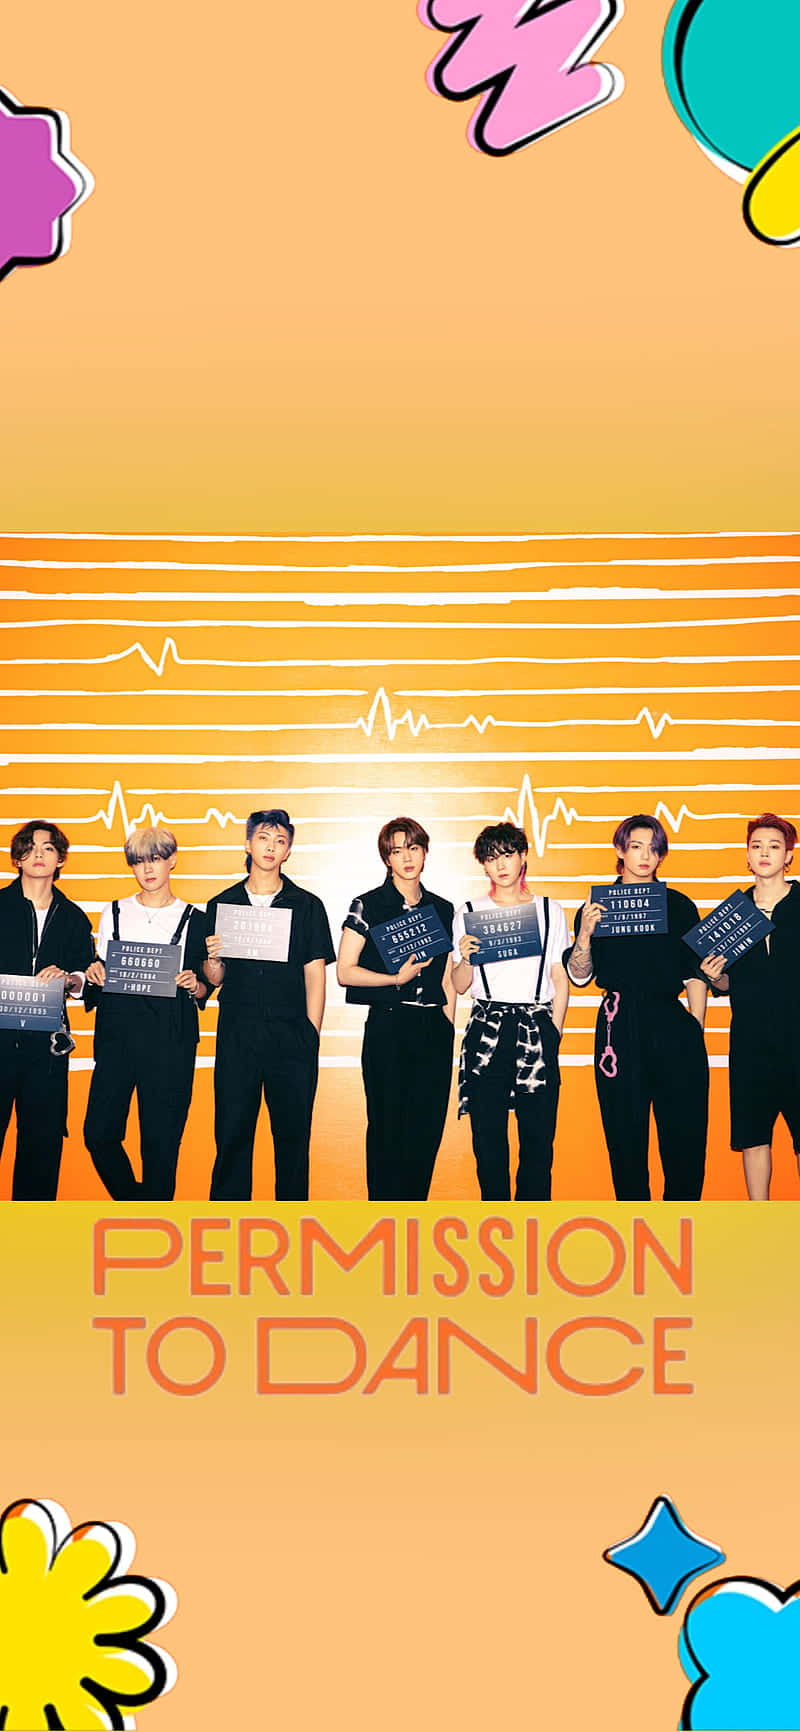 BTS Brings Us Their Newest Track "Permission To Dance" Wallpaper